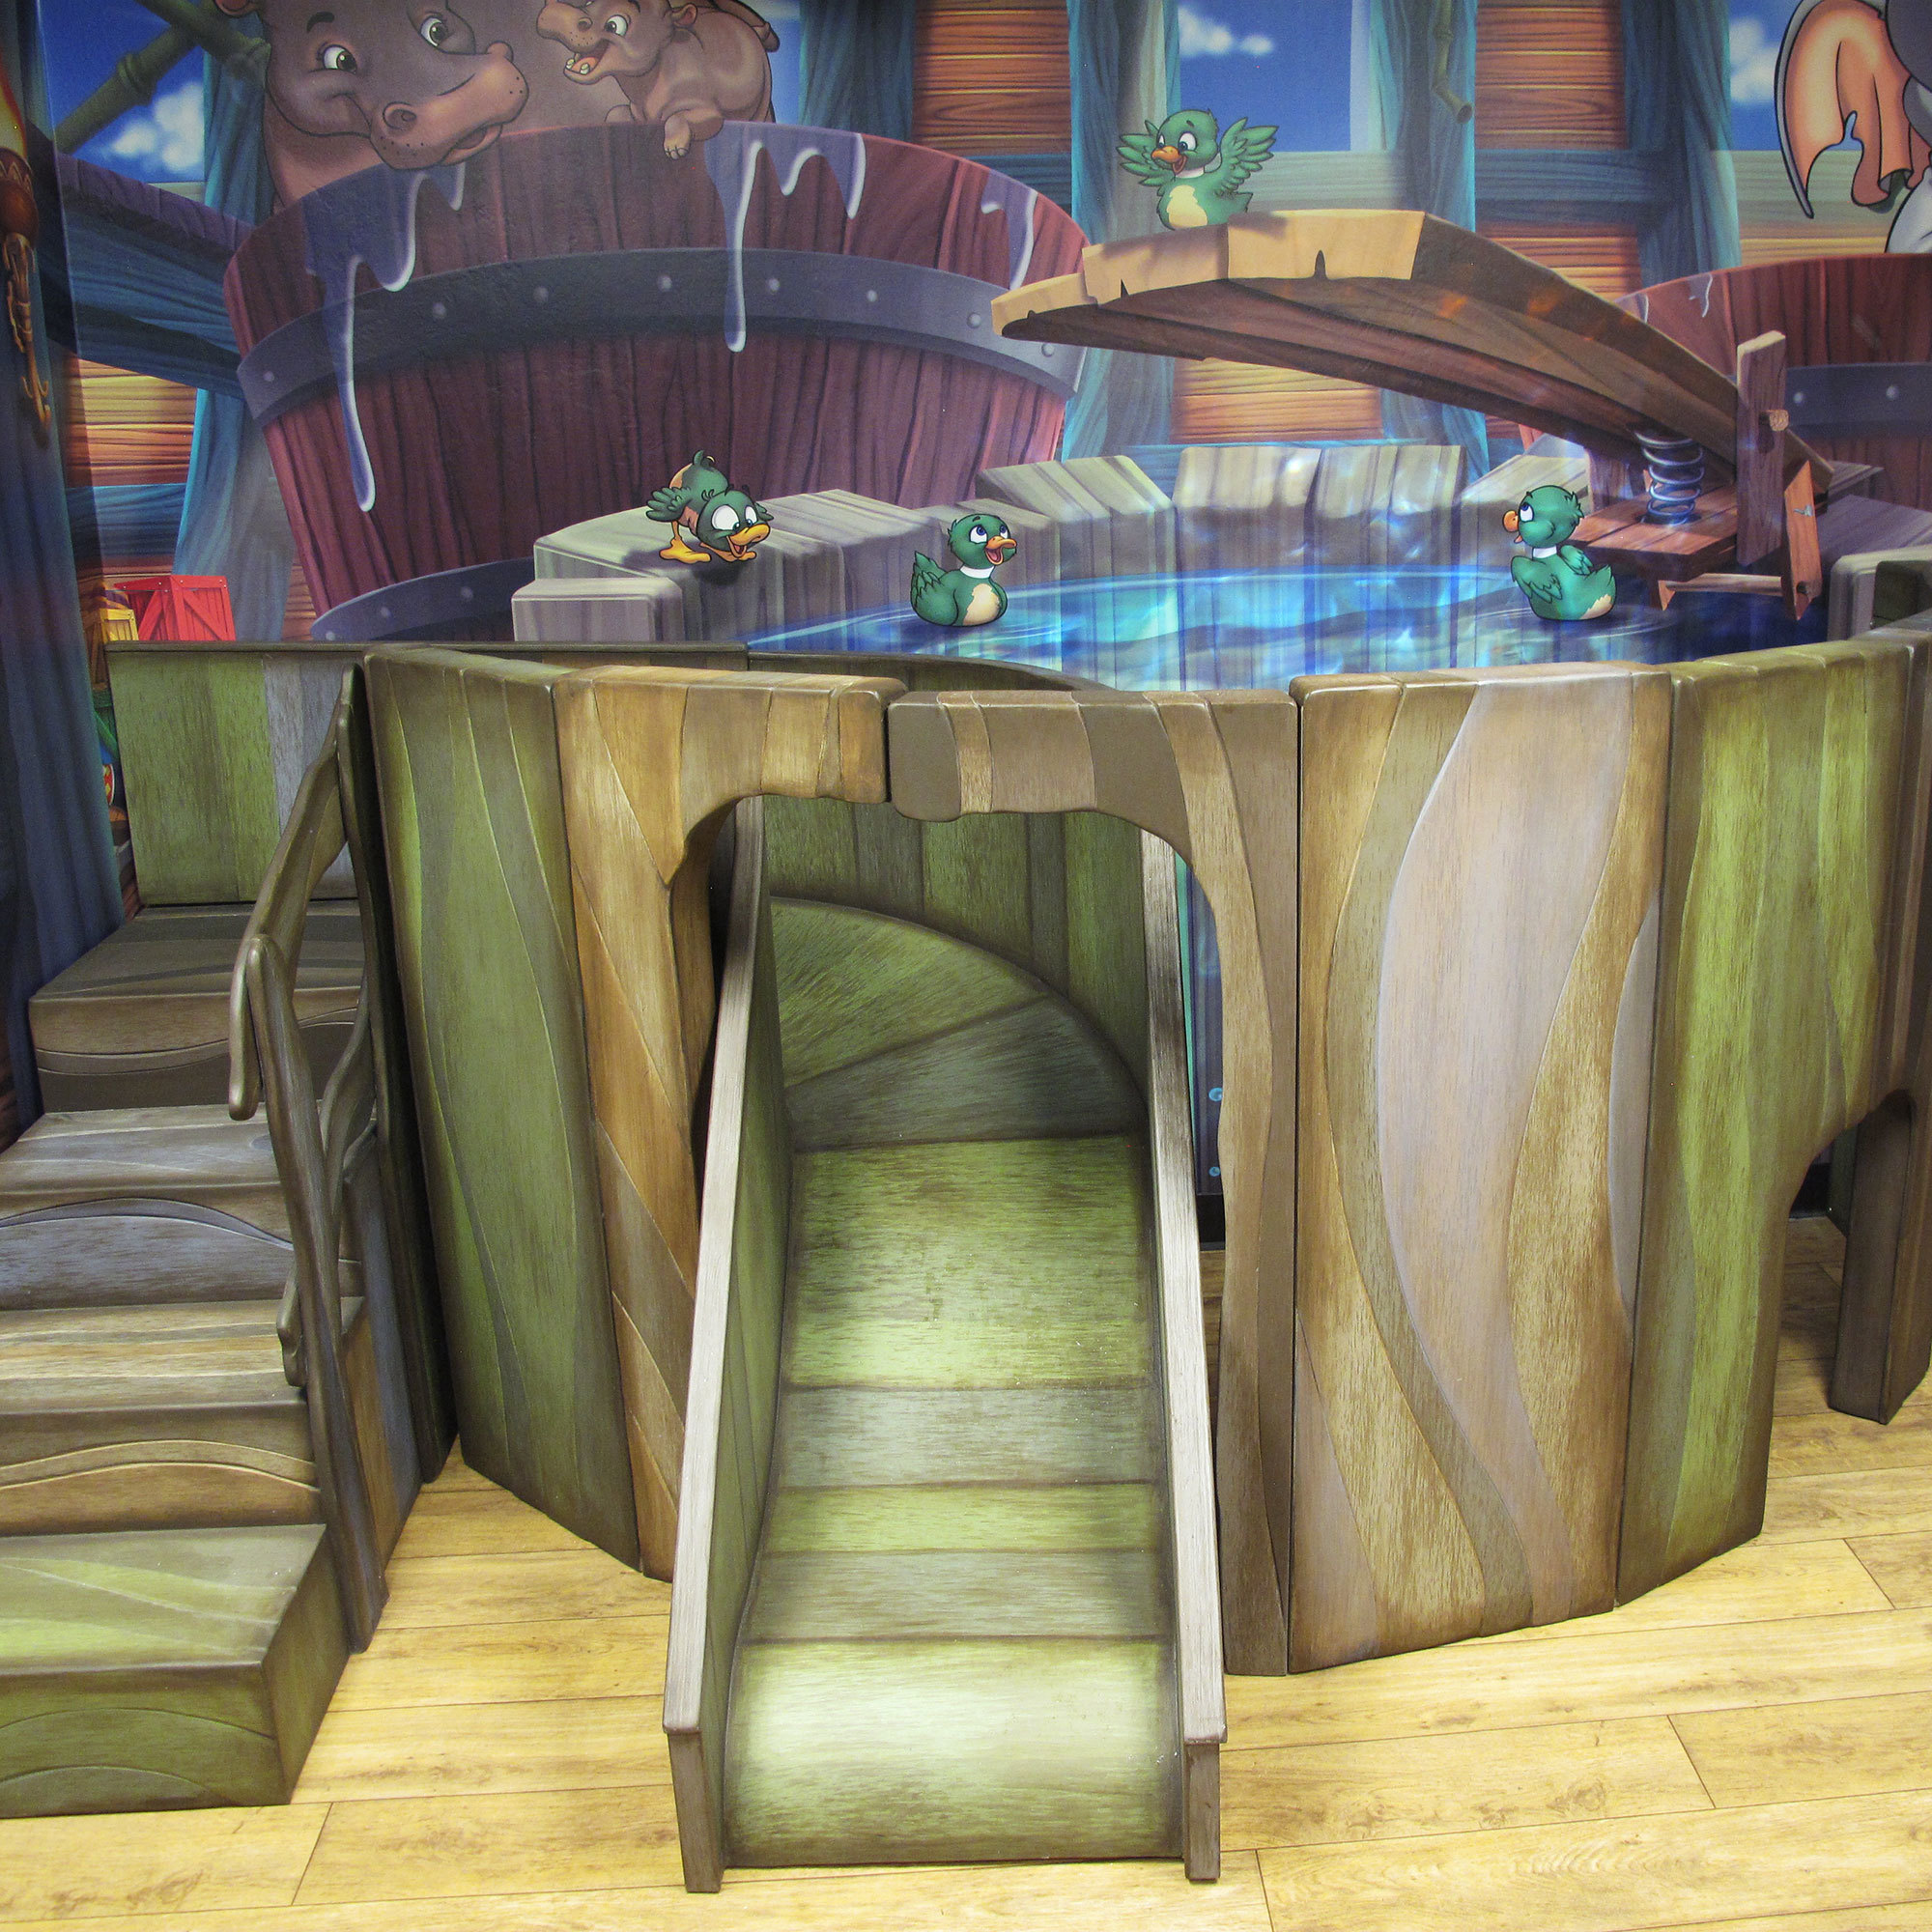 Noah's Ark Themed Play Area Slide featuring optical illusion hot tub with stairs and slide.